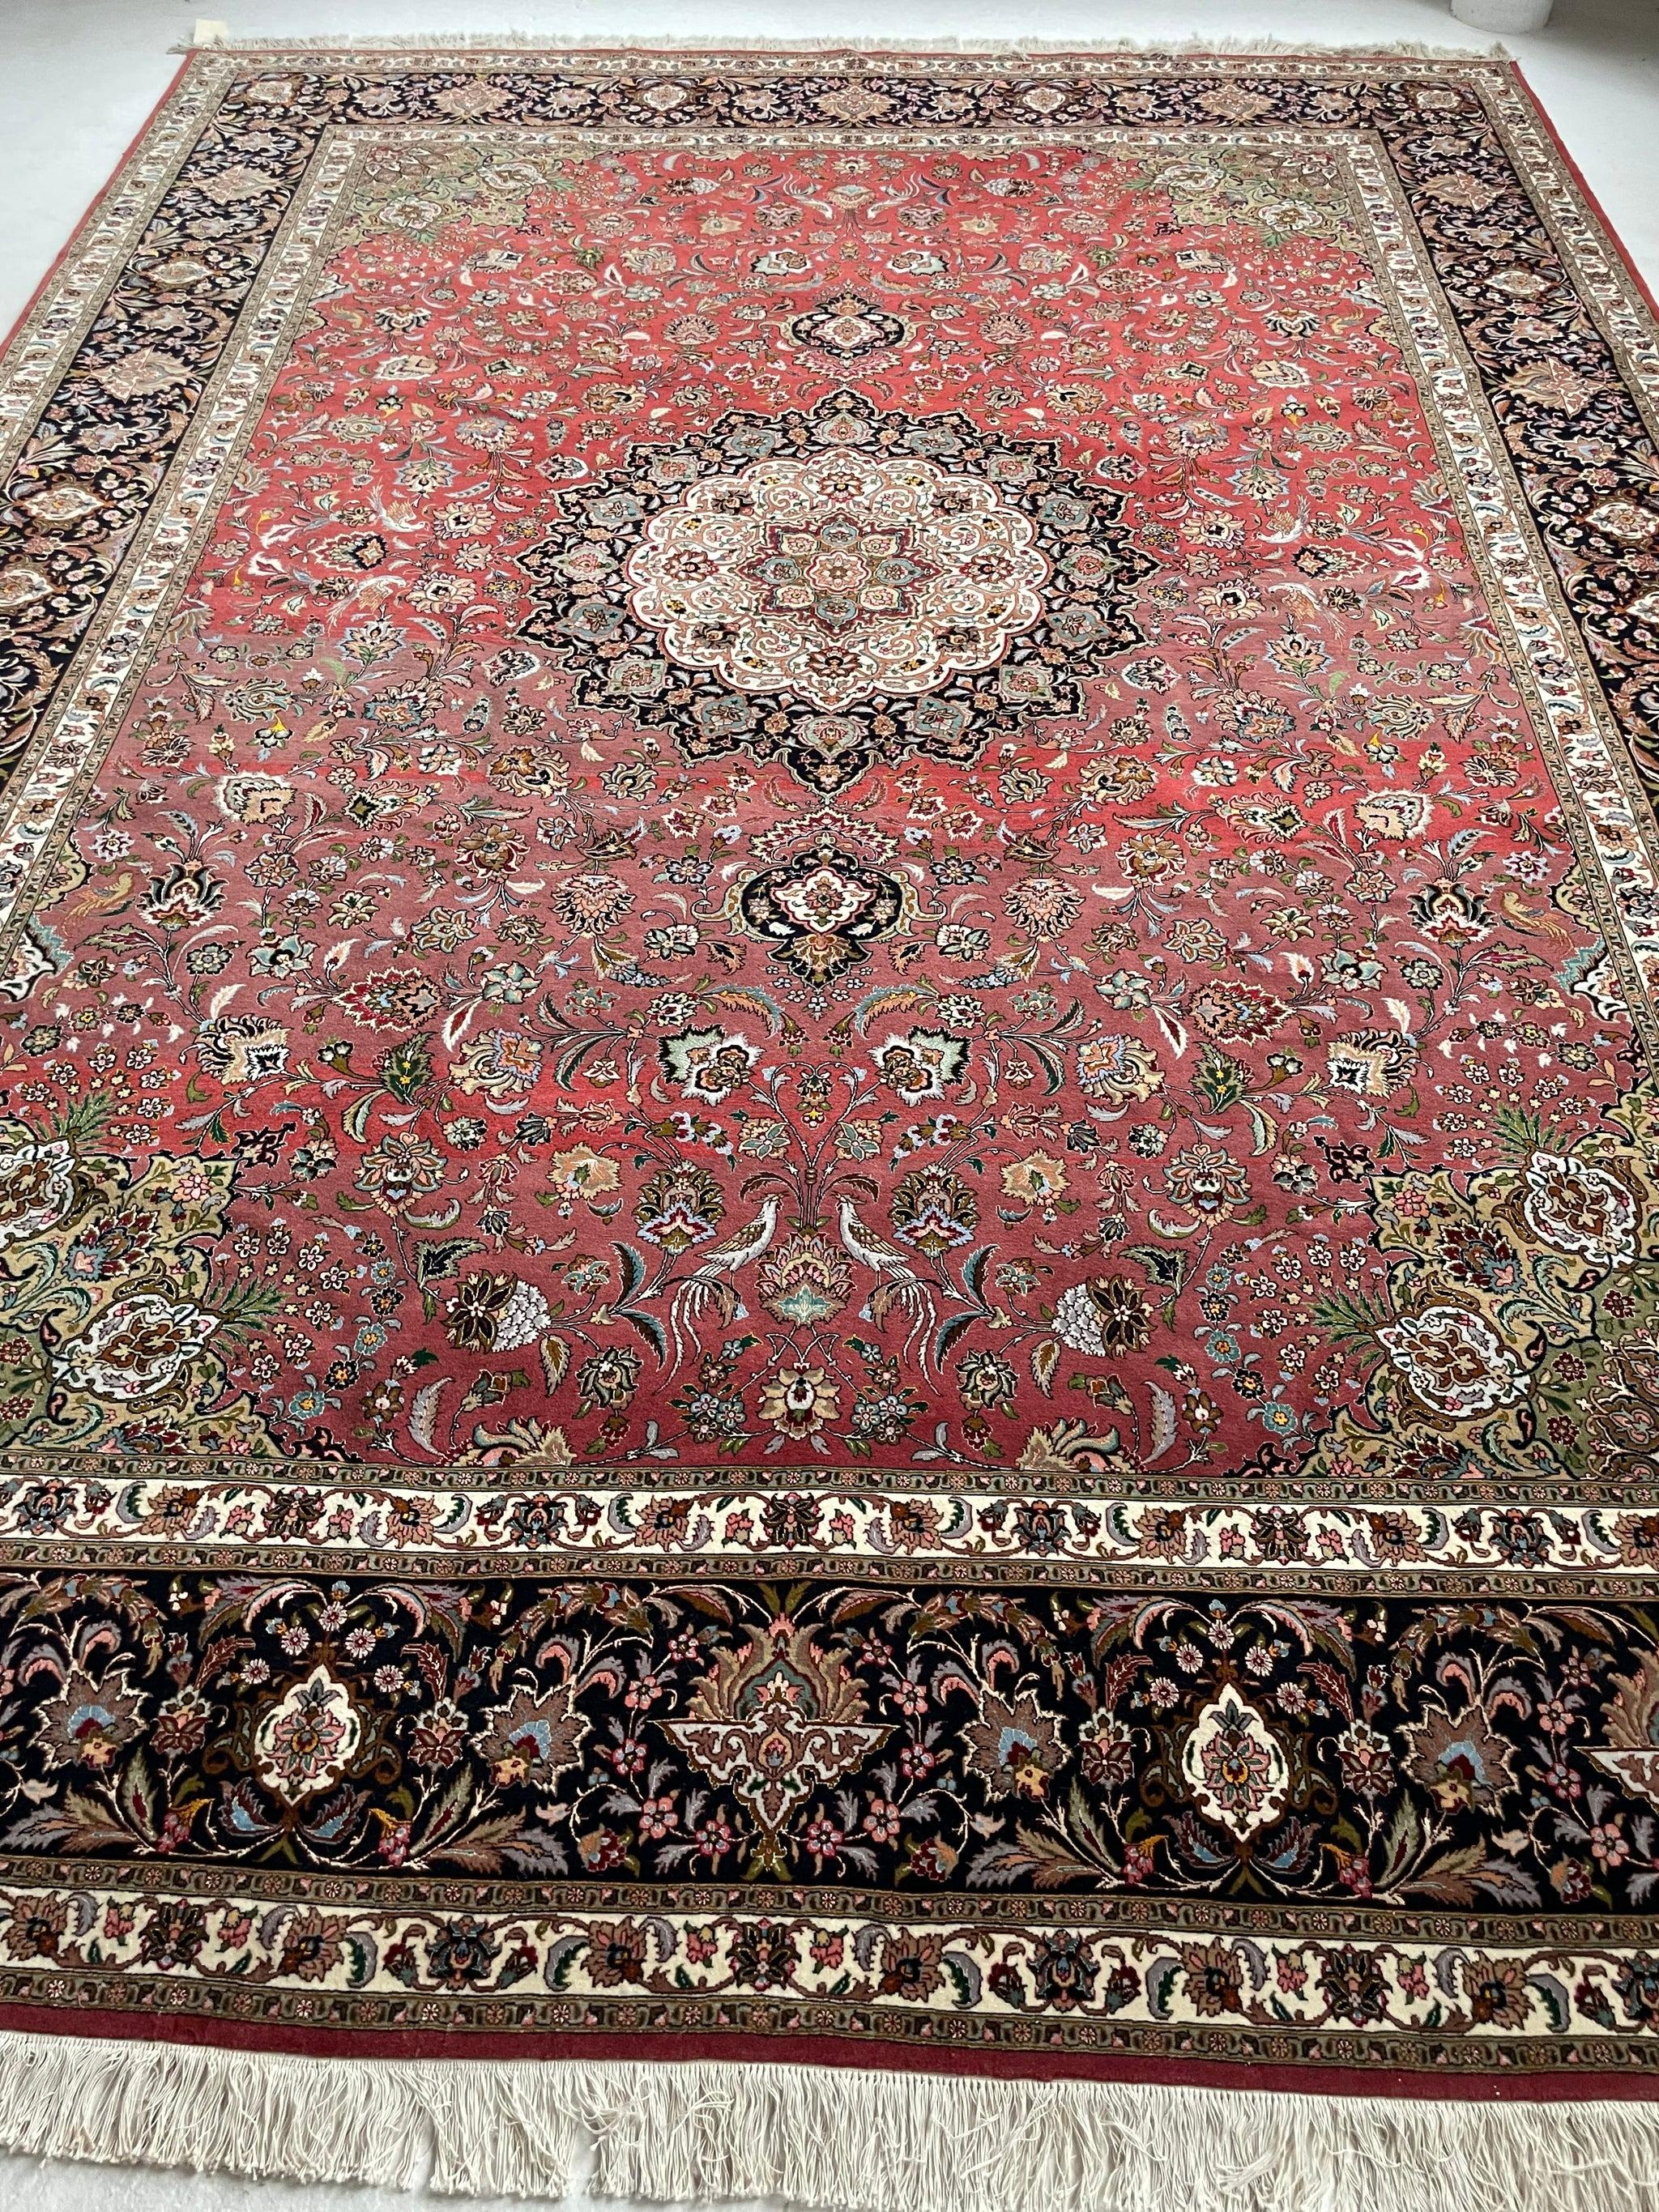 Masterpiece Tabriz  Over 1m Knots  Fine Silk Rug with Royal Bird Motifs, circa 1950

About:  Absolutely Masterpiece - this piece is constructed of wll over 1 Million knots!!!! It took years to weave this masterpiece.  This rug is made of organic